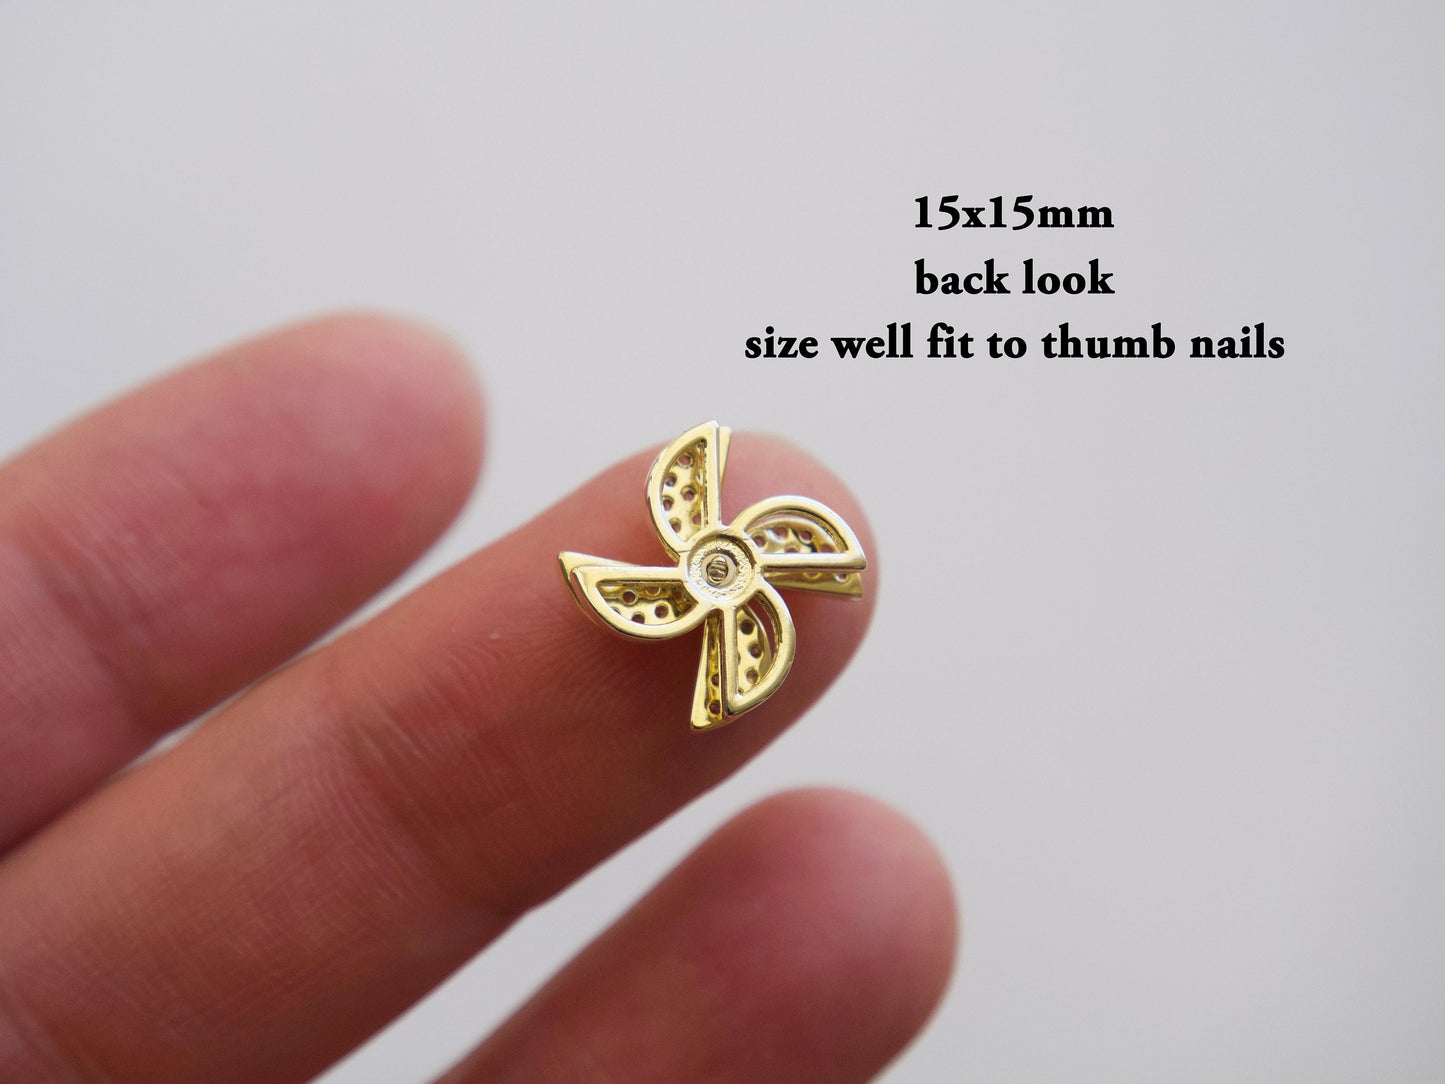 3D Windmill Spinning Zircon nail decoration/ Gold plated Spin Rotation charm Nail DIY decal